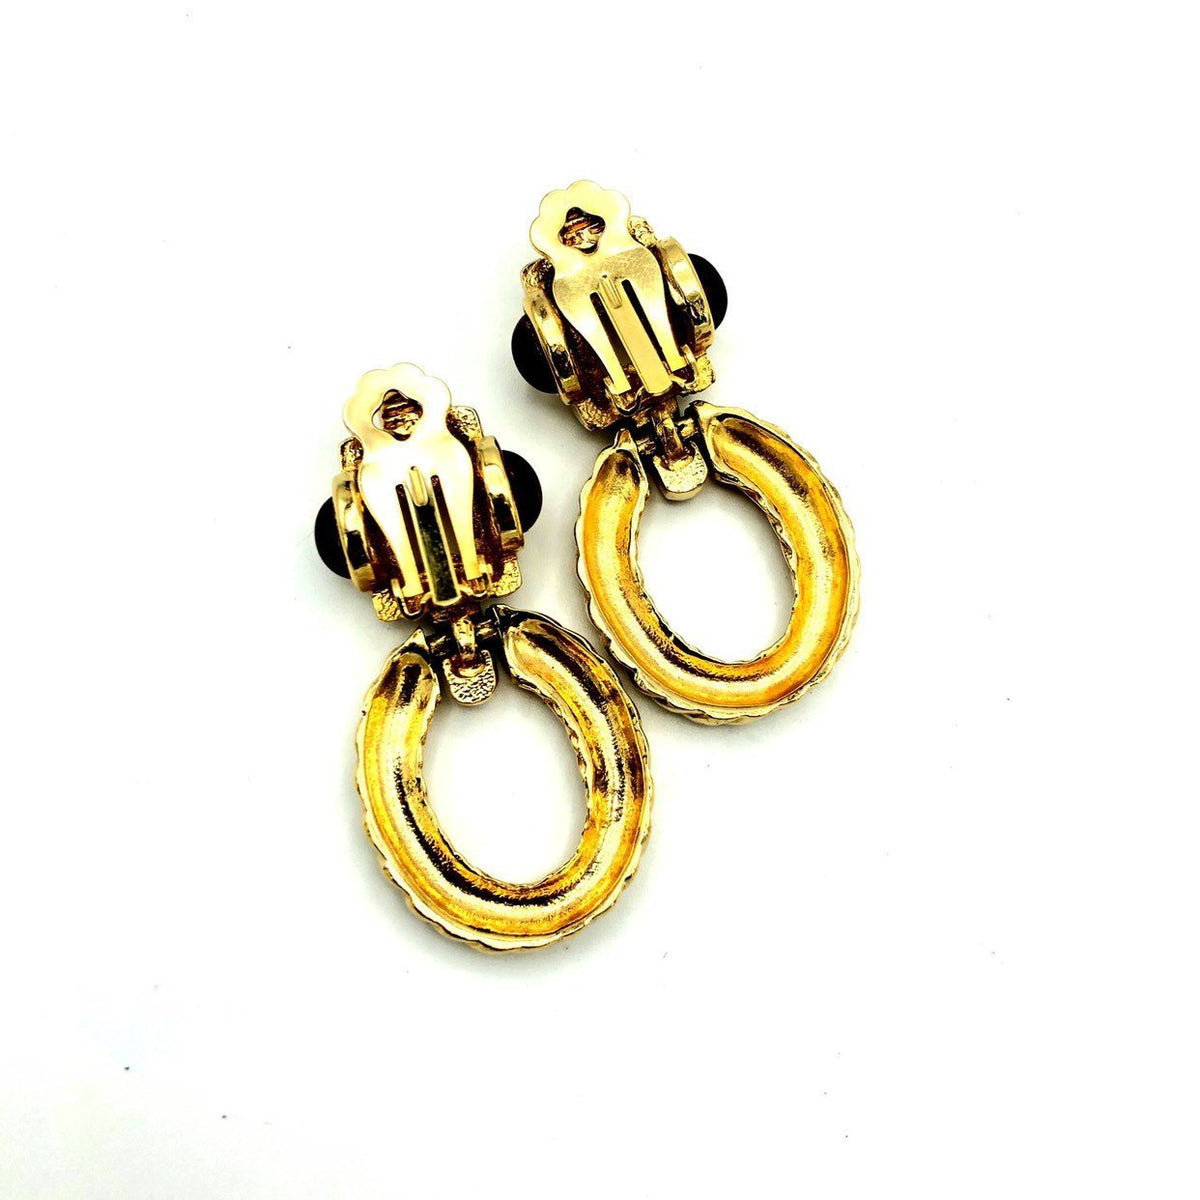 Gold Gripox Cabochon Rhinestone Vintage Clip-On Earrings - 24 Wishes Vintage Jewelry